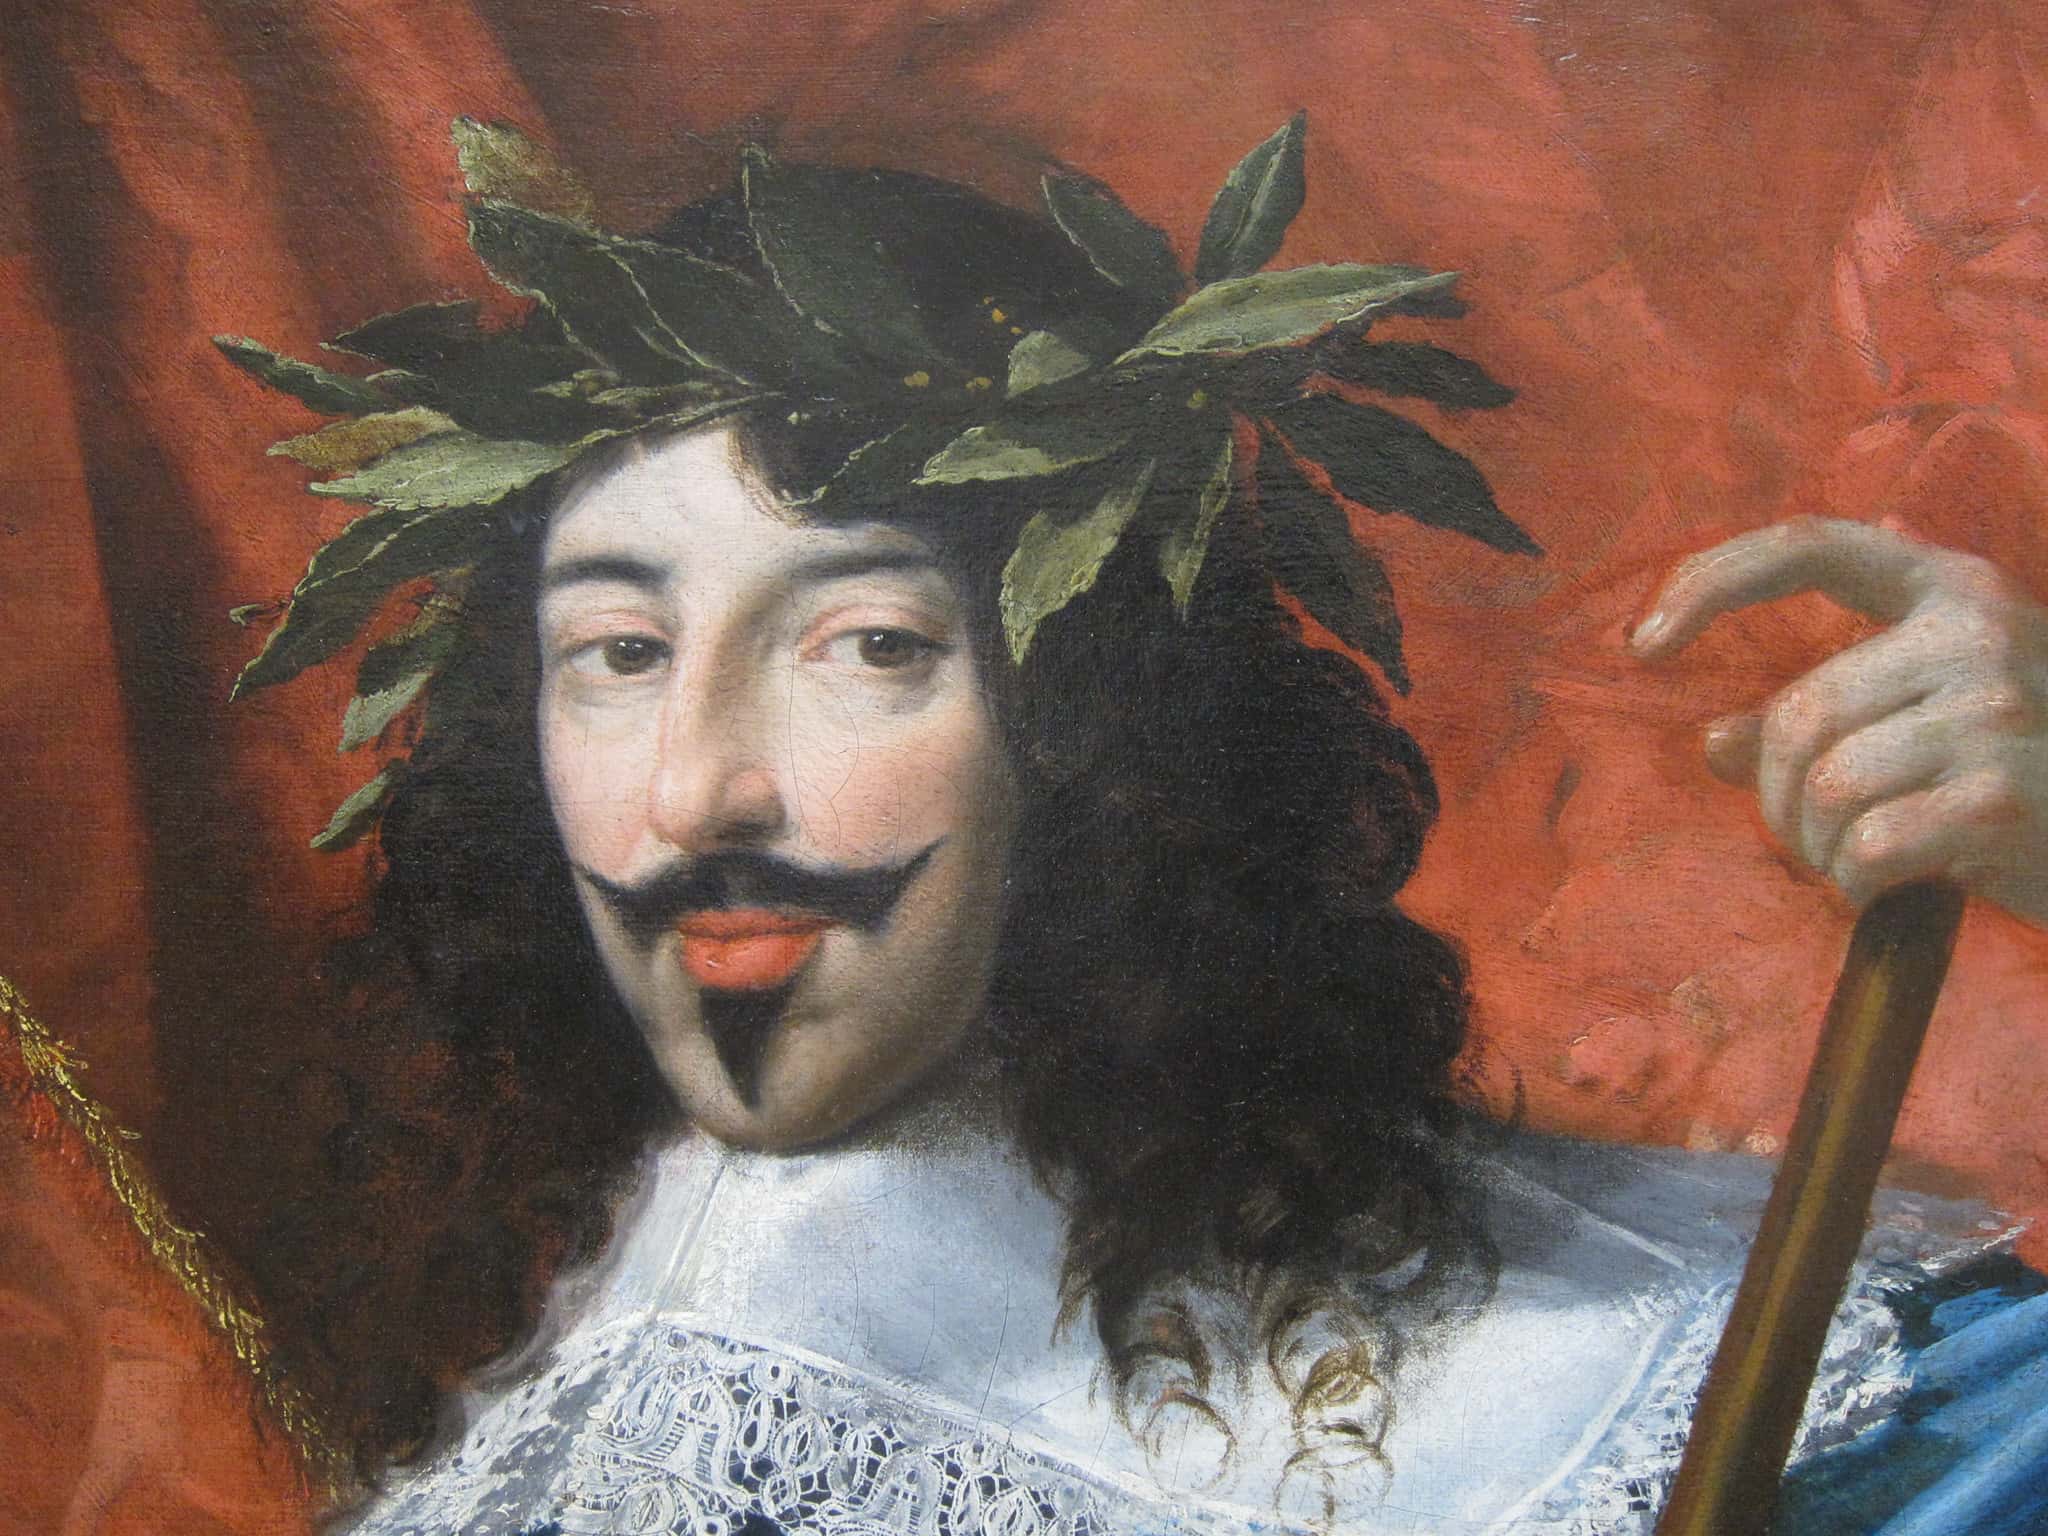 Iron-Fisted Facts About Louis XIII, The Boy Who Became King - Factinate